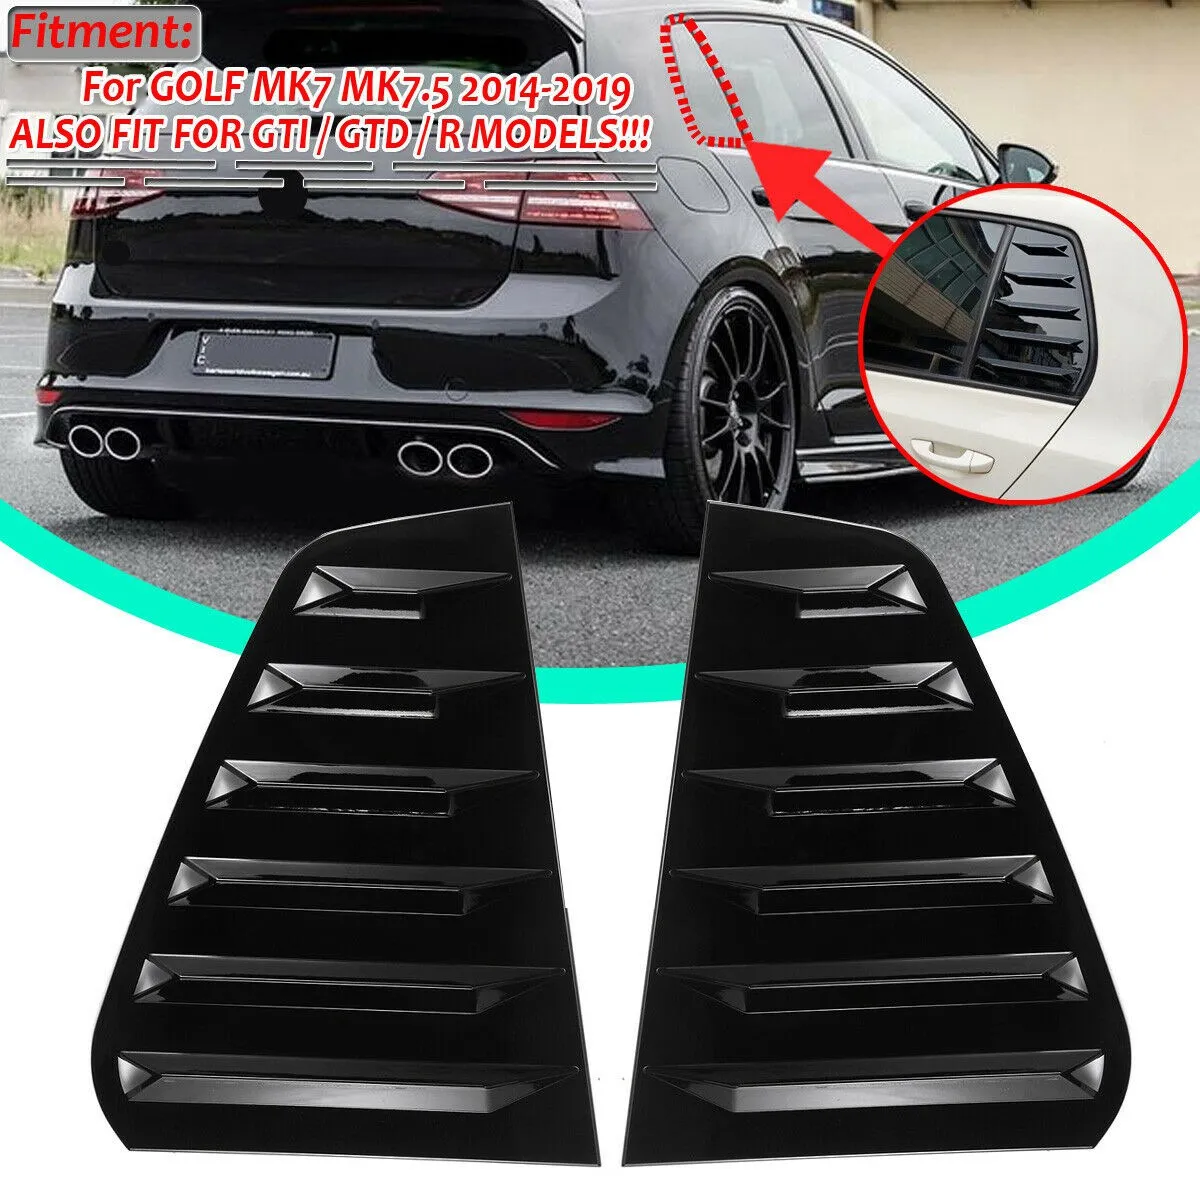 

Car Rear Side Window Louvers, for Golf 7 R MK 7 7.5 2013-2020 Racing Style Window Blinds Air Vent Scoop Cover Black